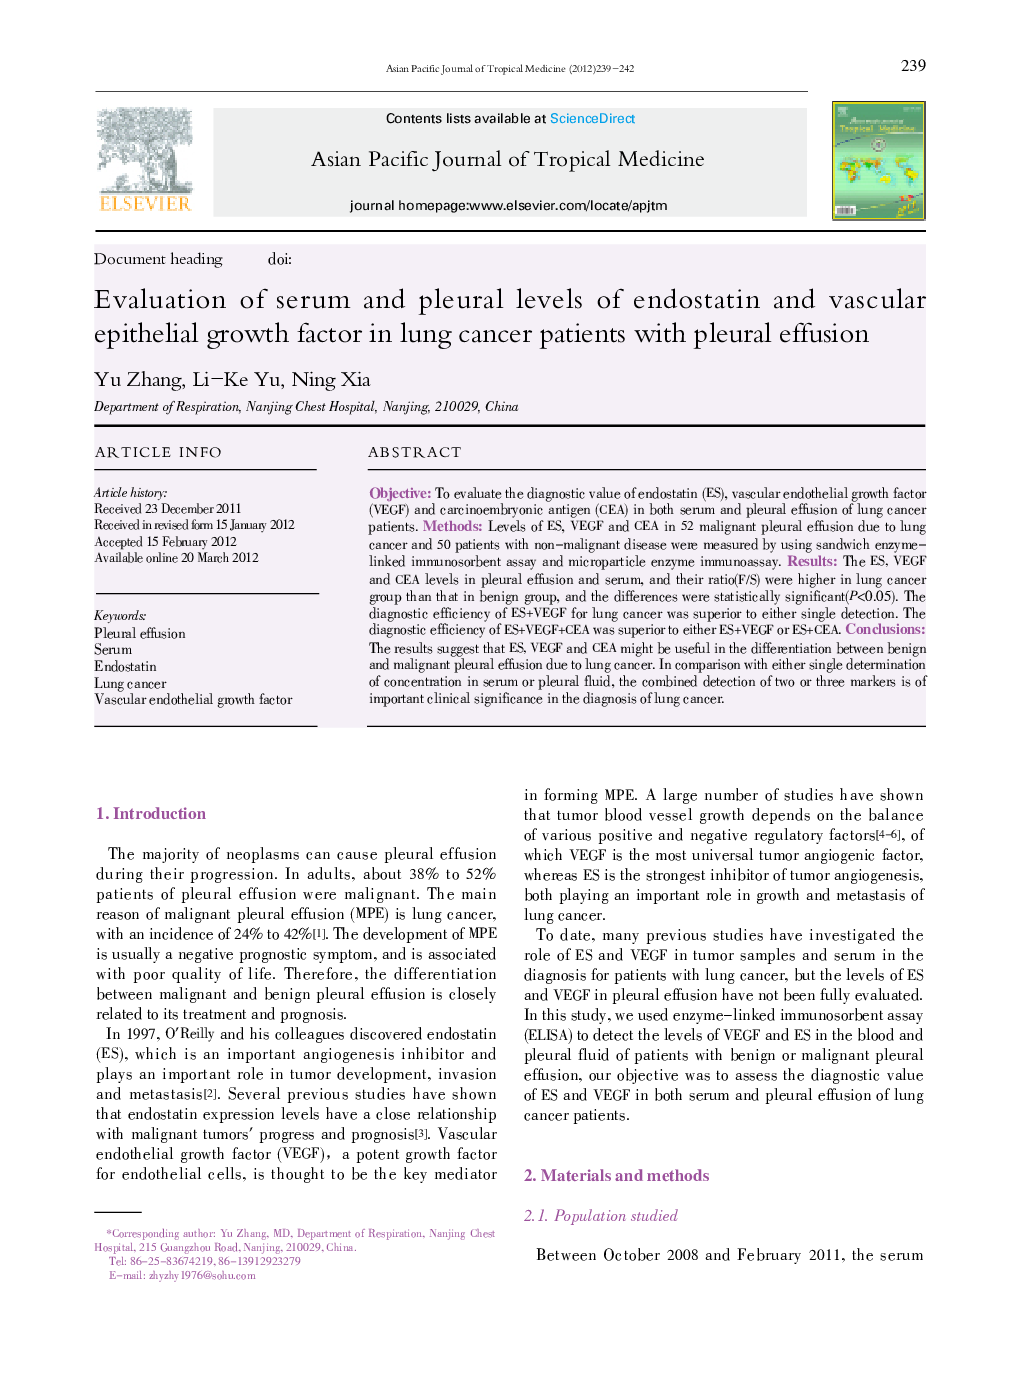 Evaluation of serum and pleural levels of endostatin and vascular epithelial growth factor in lung cancer patients with pleural effusion 